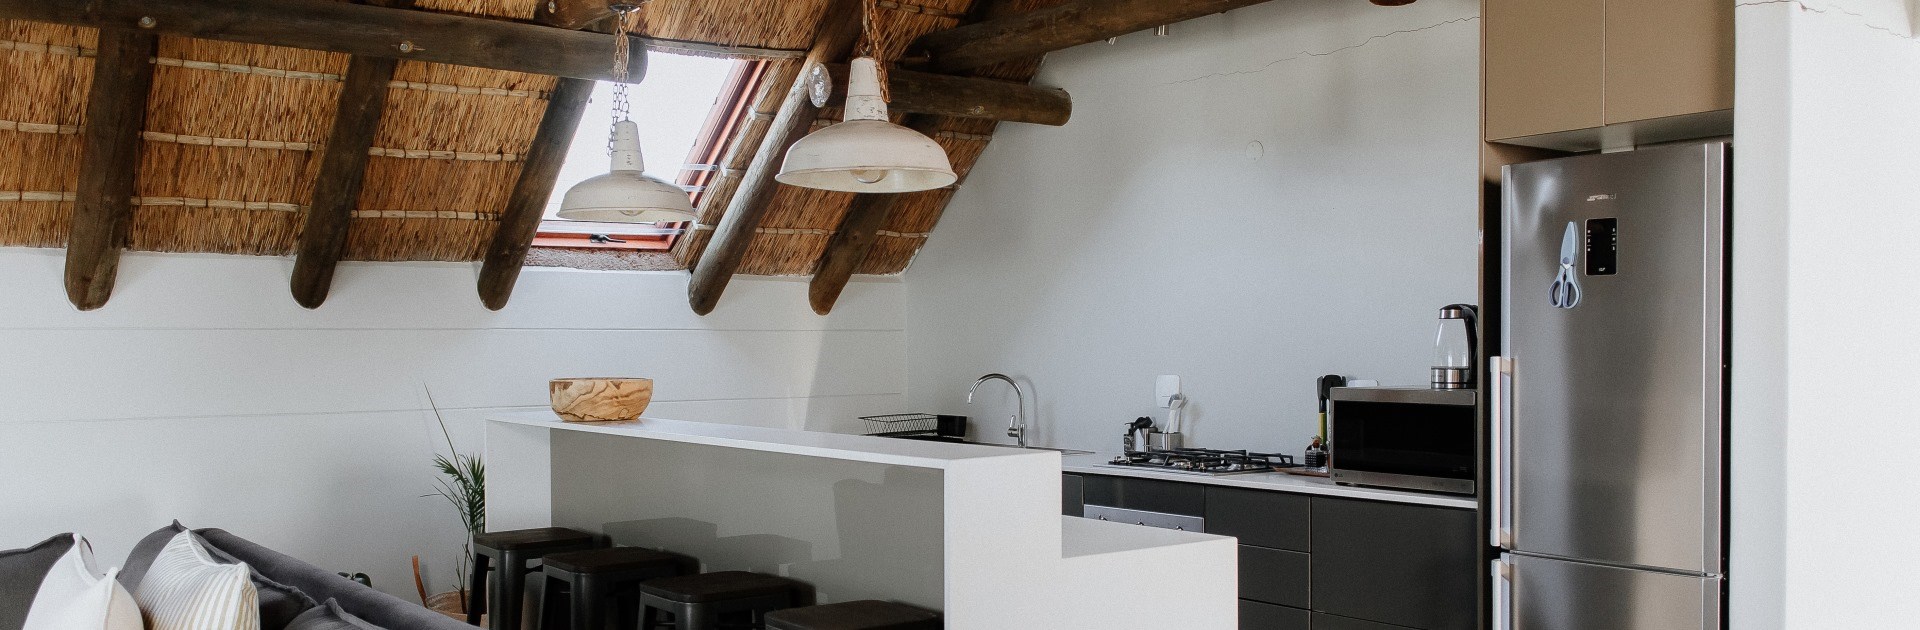 Book accommodation at Paternoster Rentals